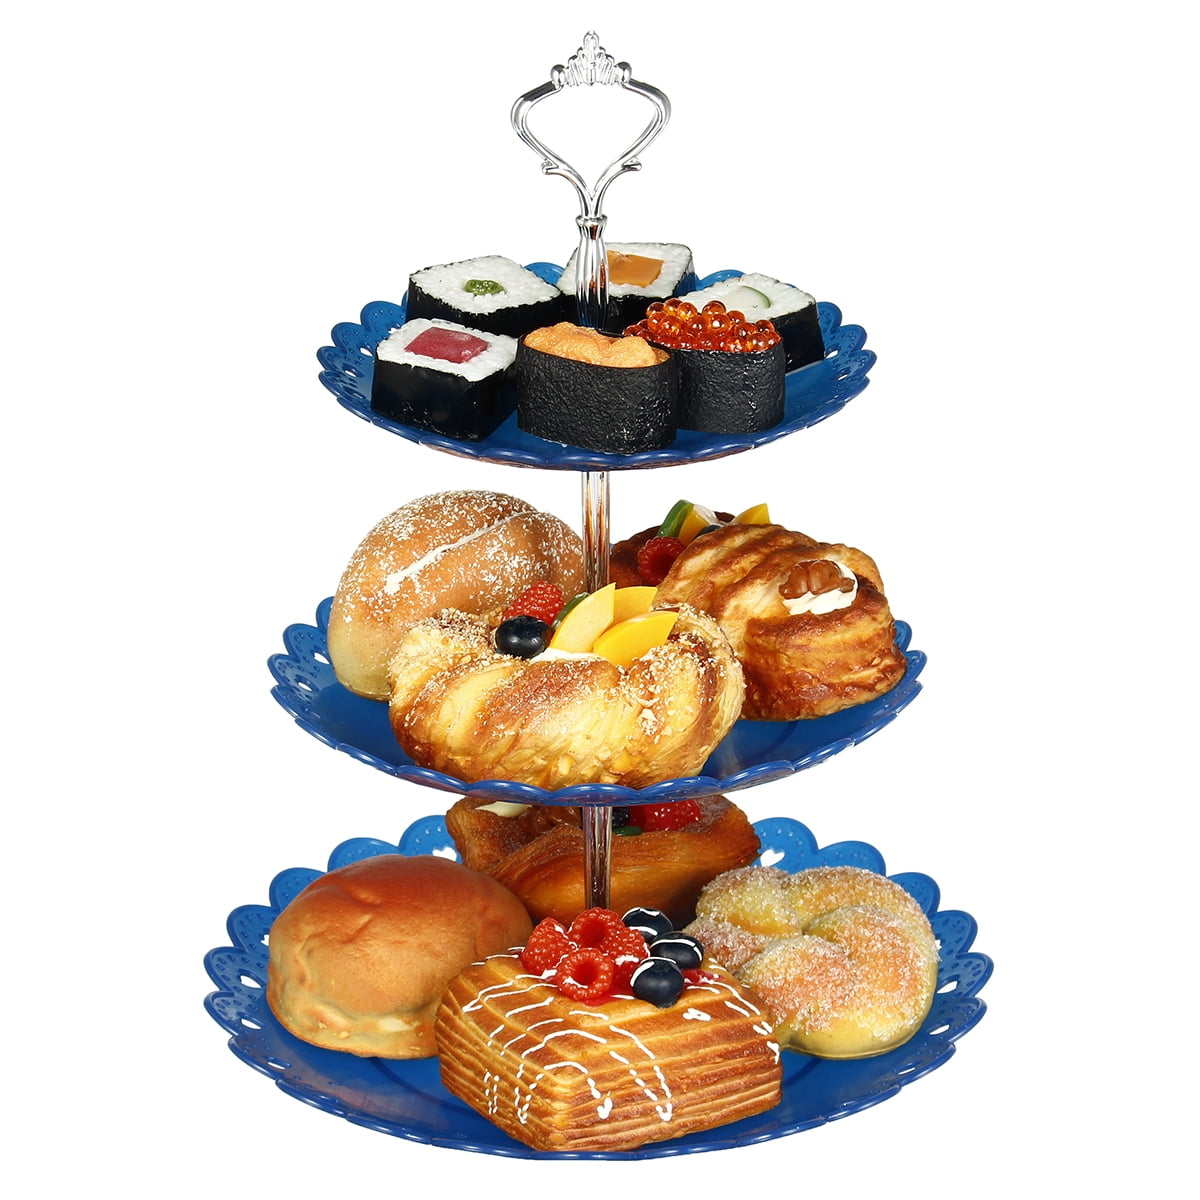 3-Tier Cake Dessert Stand Comius Sharp Plastic Pastry Stand Cupcake Stand Holder Serving Platter for Tea Party Wedding Home Decor 